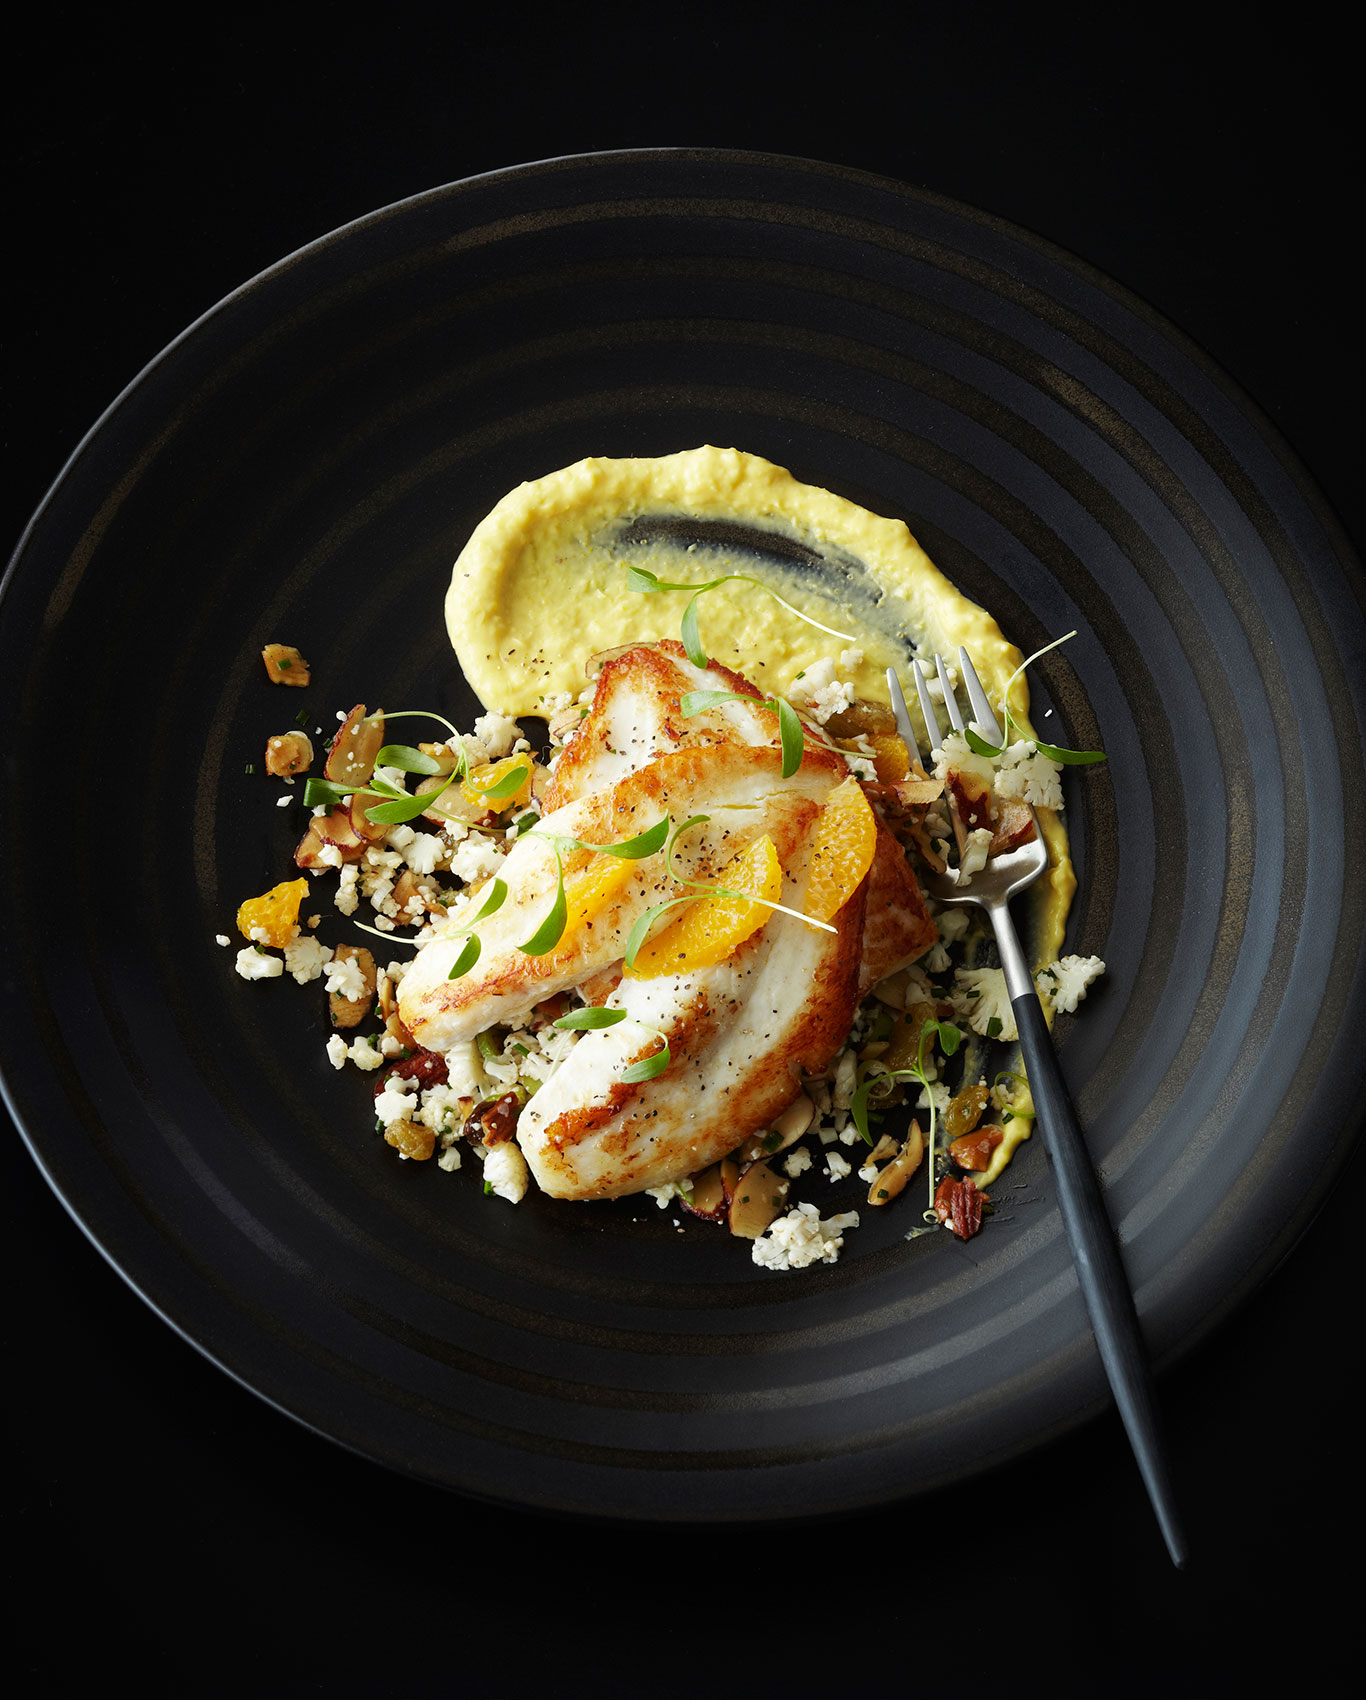 Southon Cooking • The Foodstore Panfried Dory with Crushed Nuts, Feta & Orange • Hospitality & Editorial Food Photography